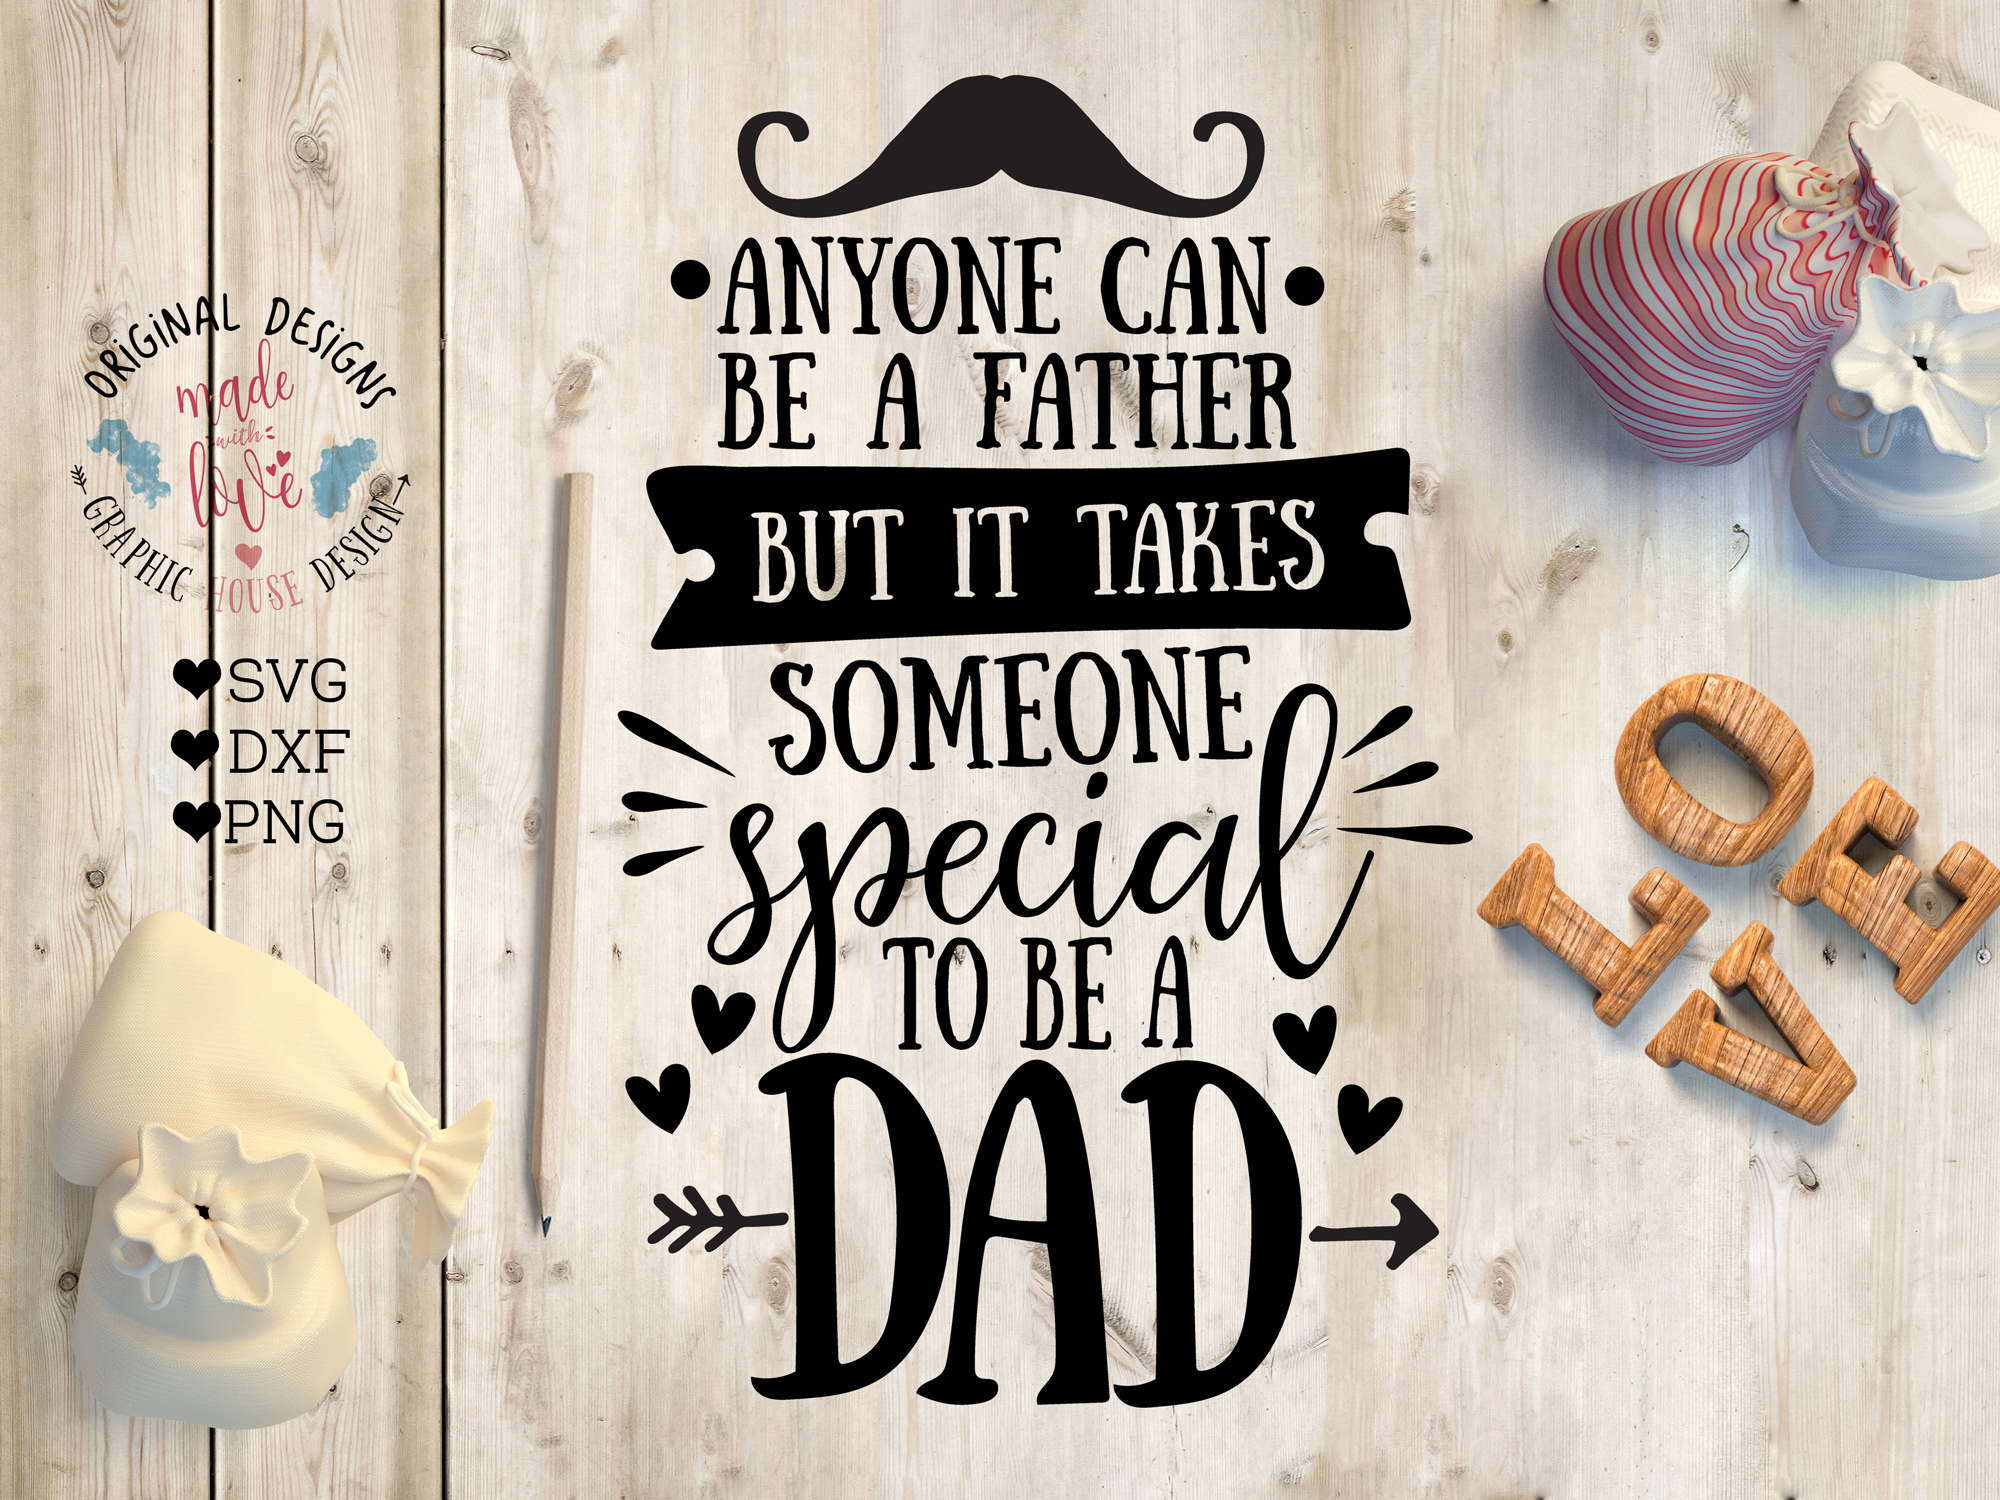 Download Anyone can be a father but it takes someone special to be a Dad Cut File in SVG, DXF, PNG